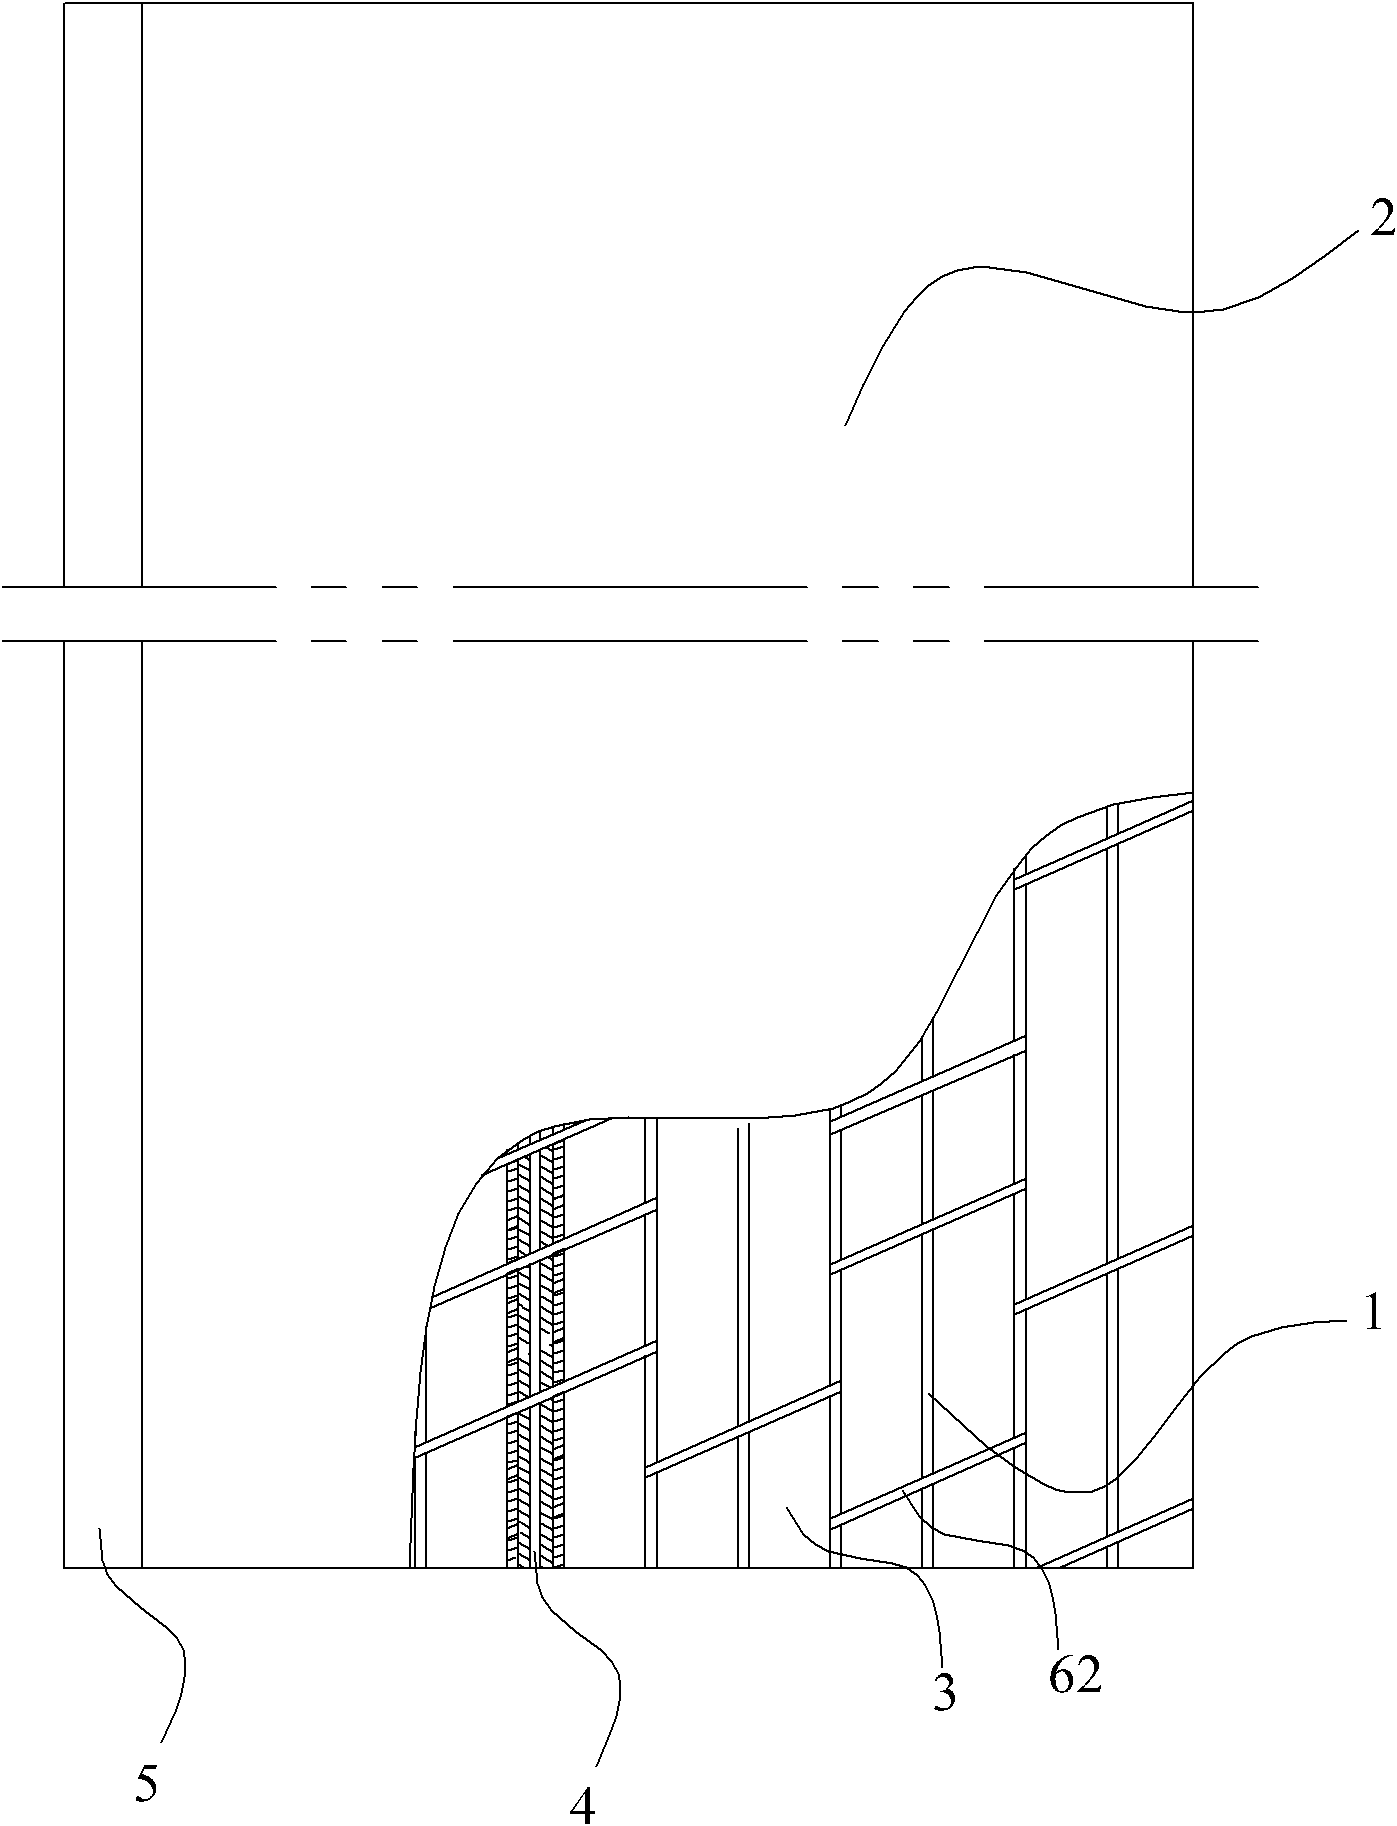 Novel pasting combined type drainage structural member